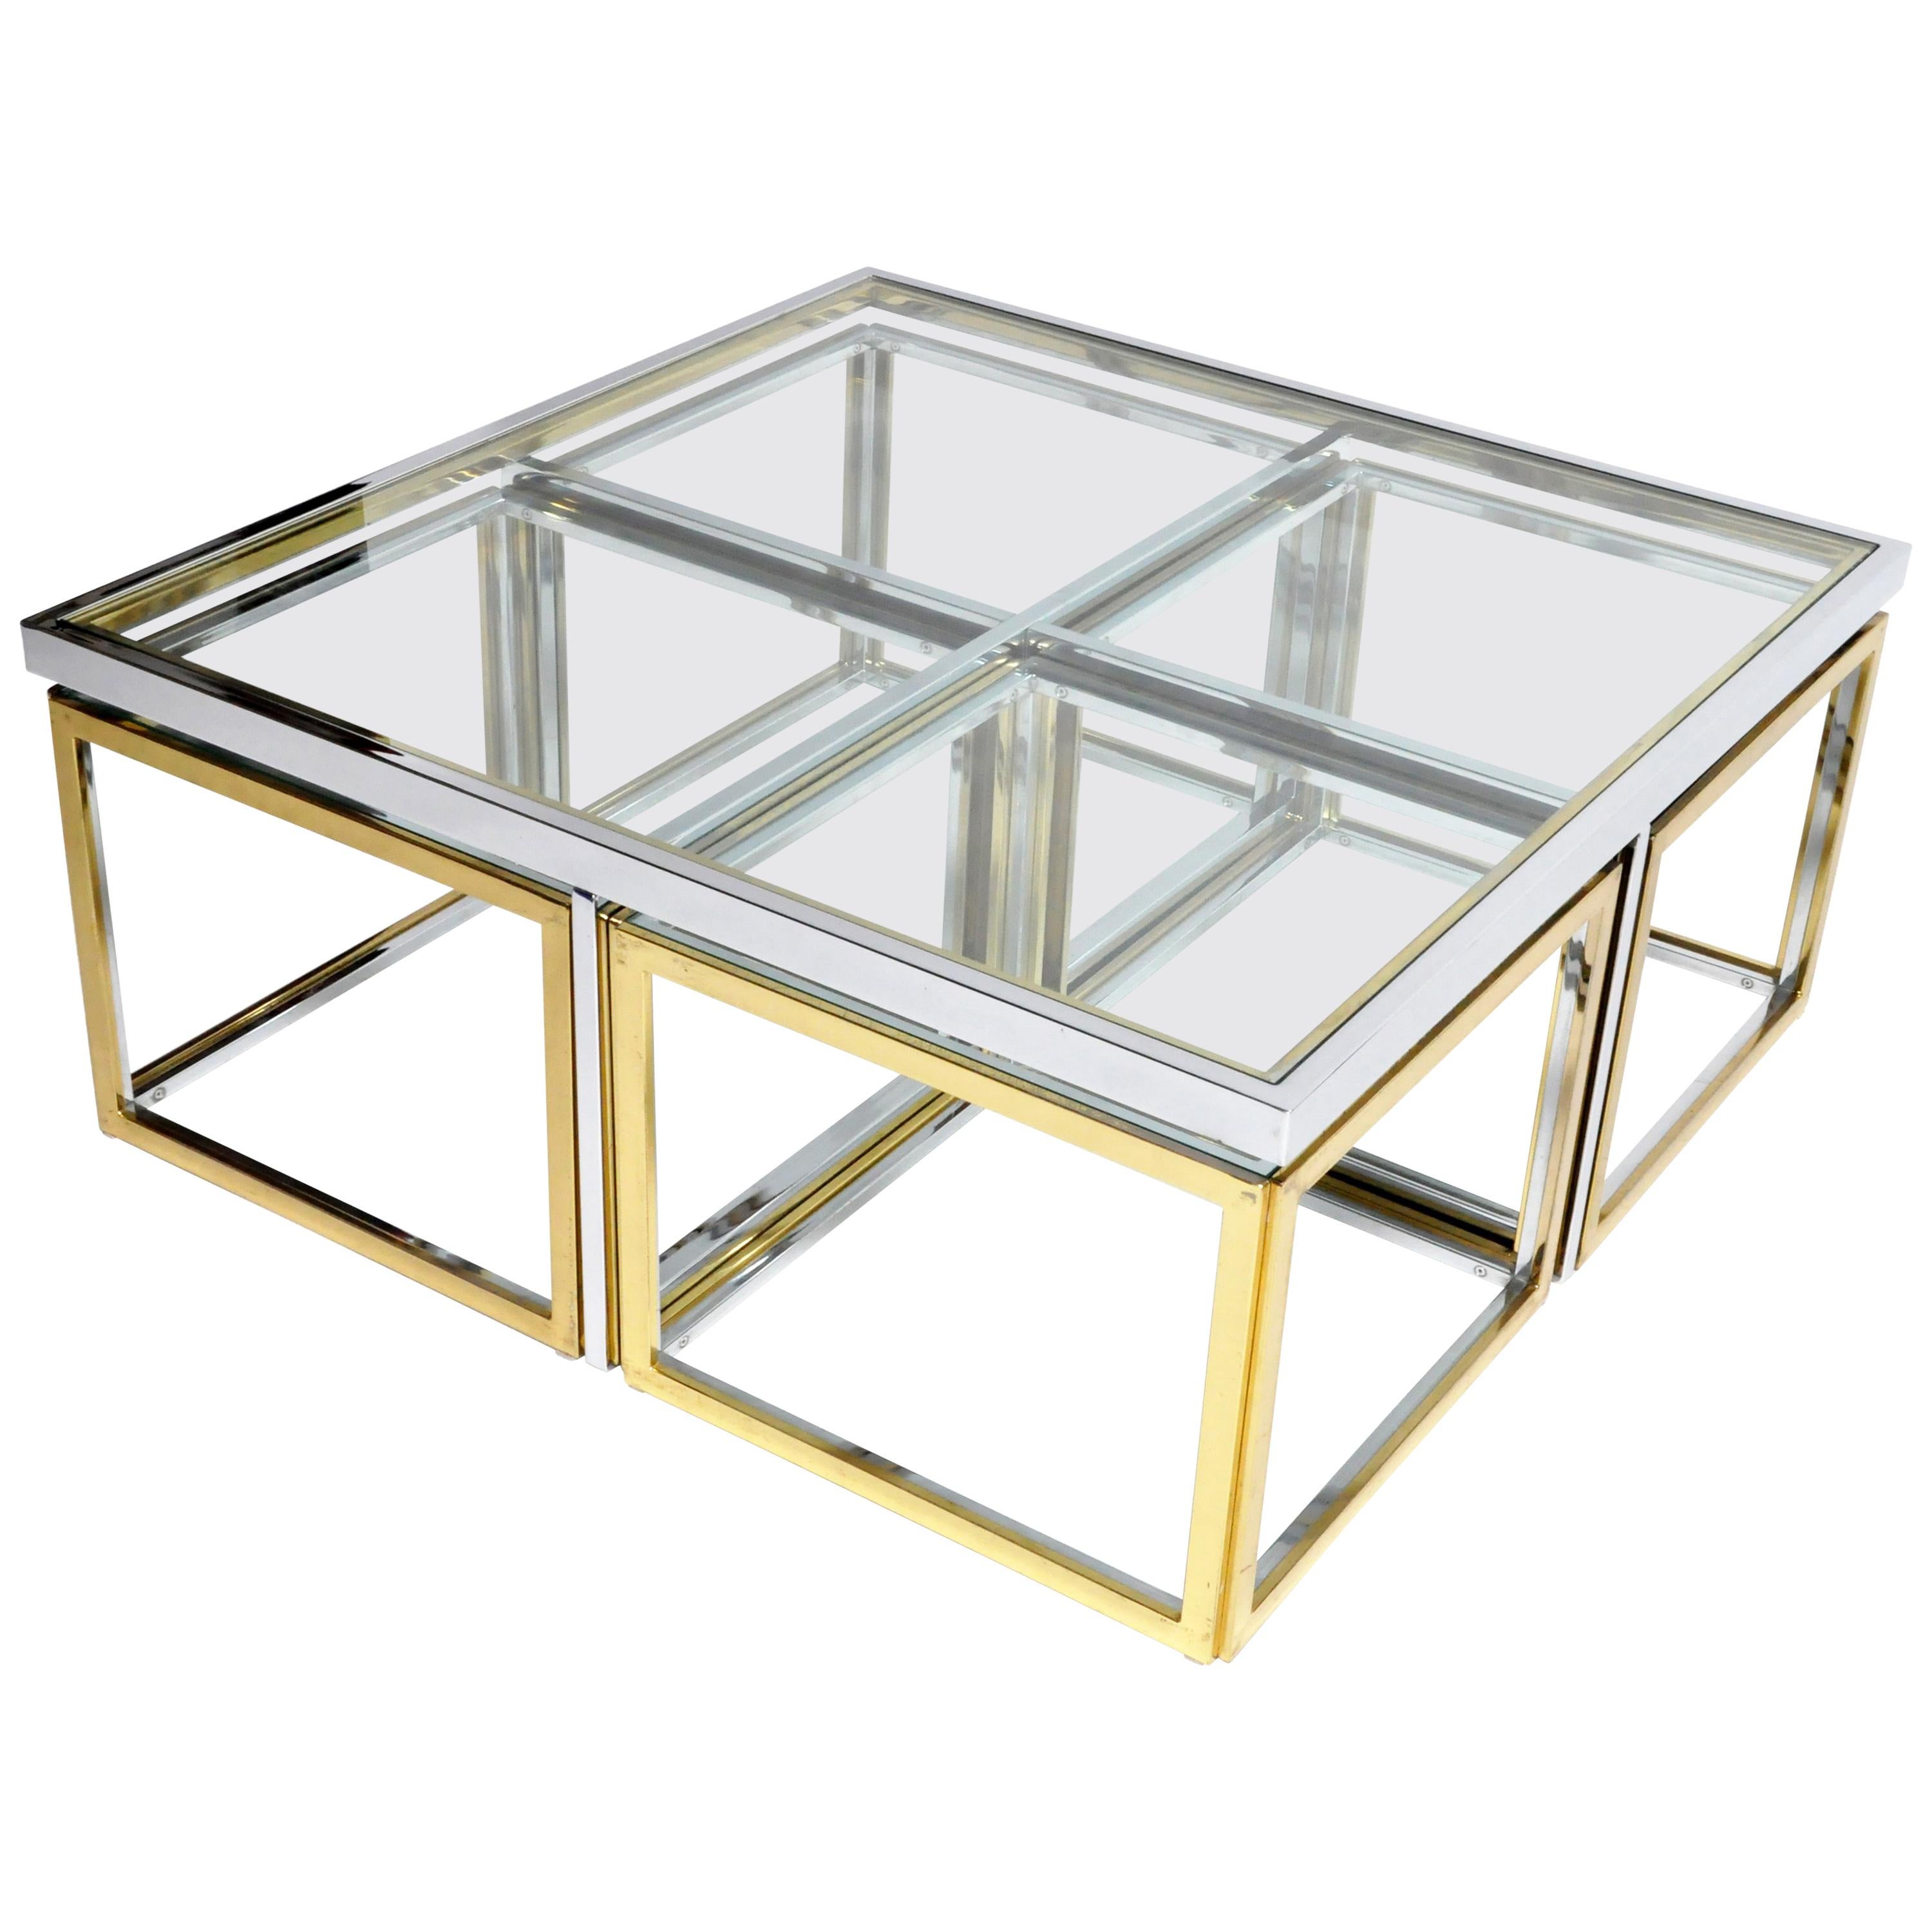 Brass, Chrome, and Glass Coffee Table Ensemble